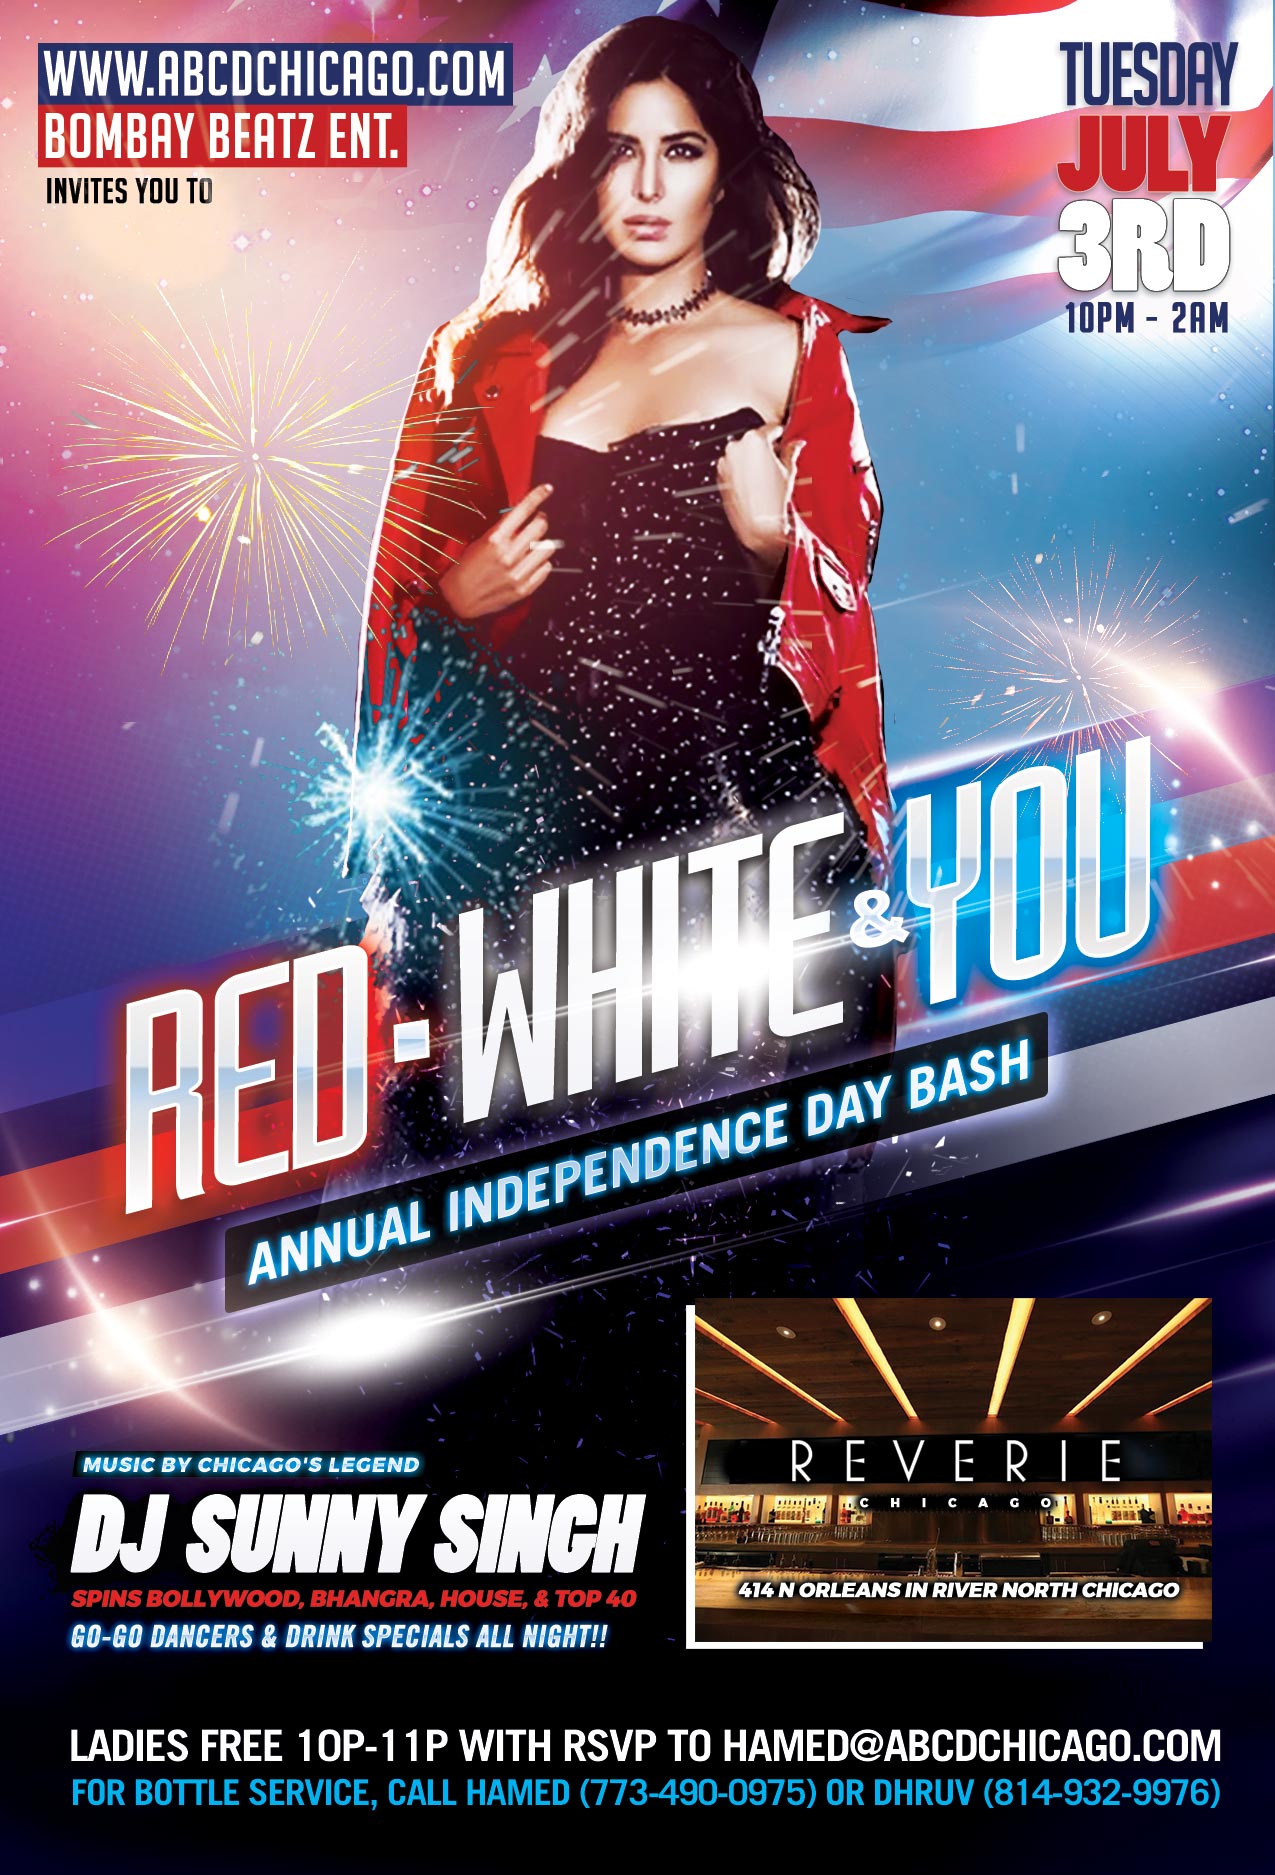 RED WHITE & YOU (Tues July 3rd)